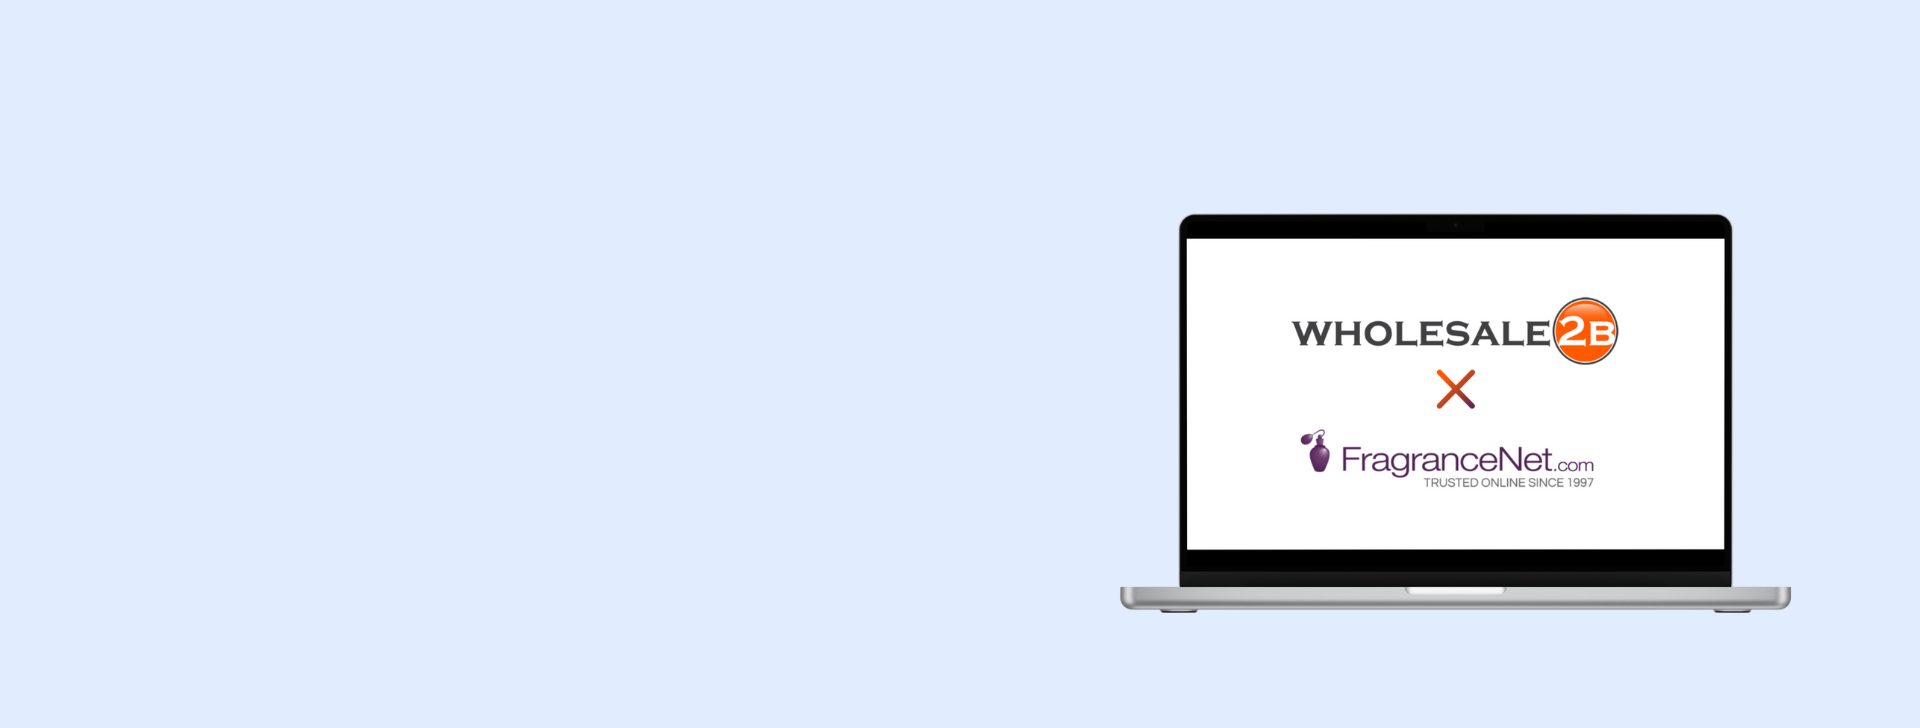 Load dropship products to yuor WooCommerce store